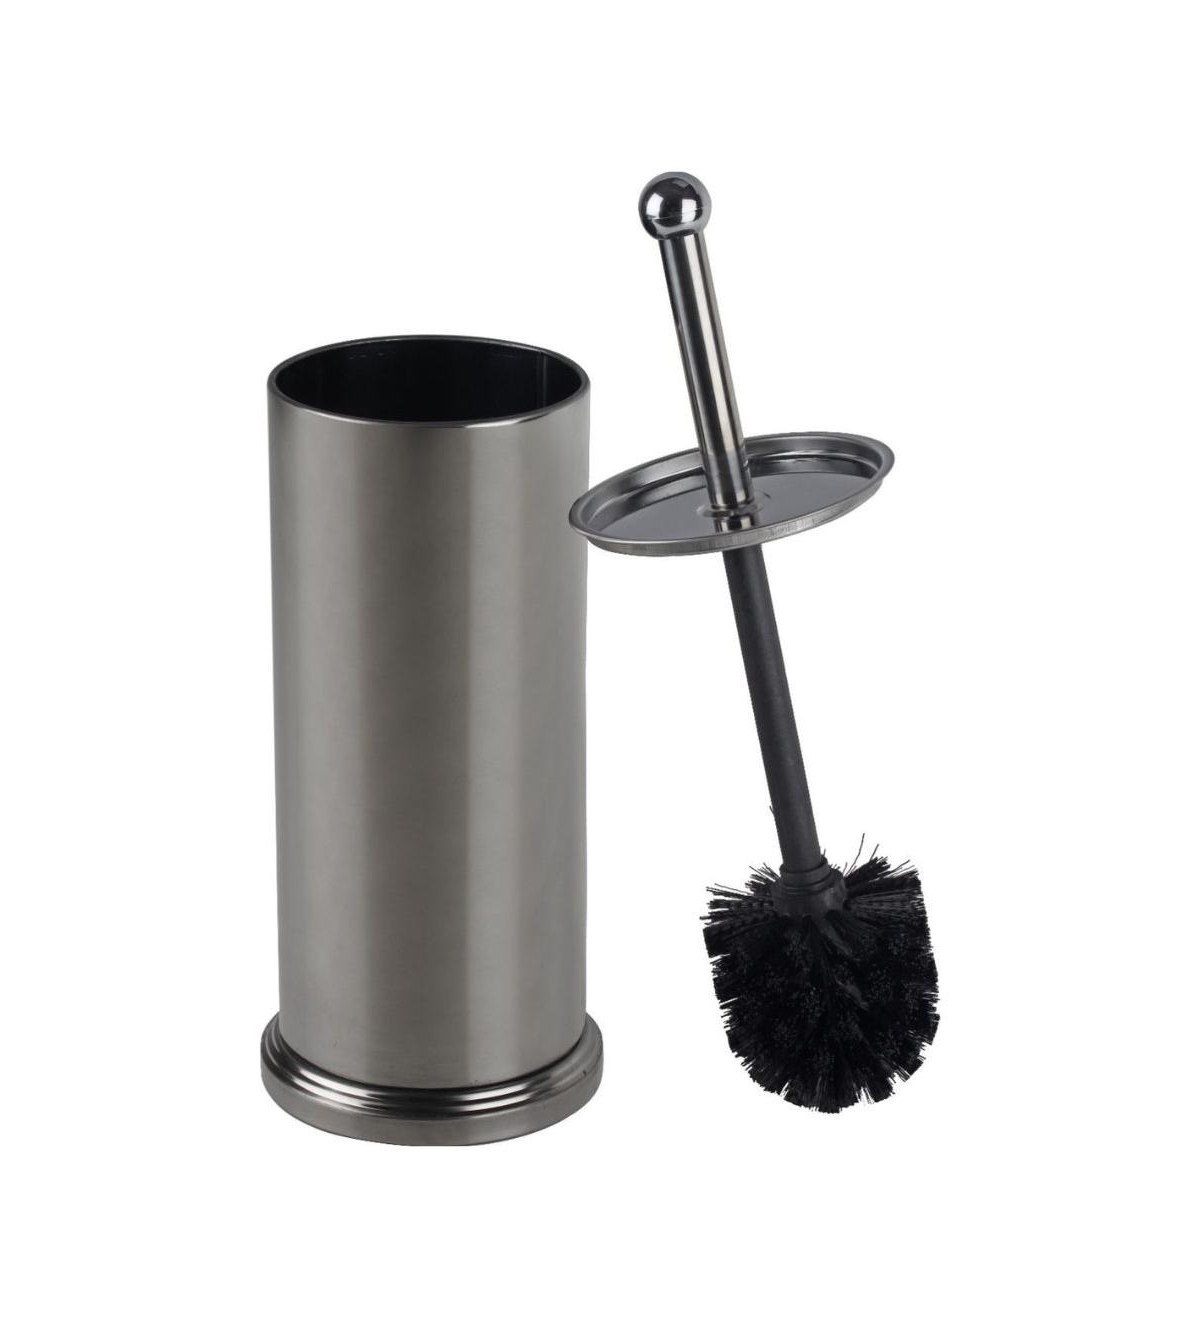 Toilet Bowl Brush and Holder - Chrome Bathroom Accessories Covered Toilet Brush Compact, Space Saving, Deep Cleaning Brush for Tall Toilet Bowl, Great